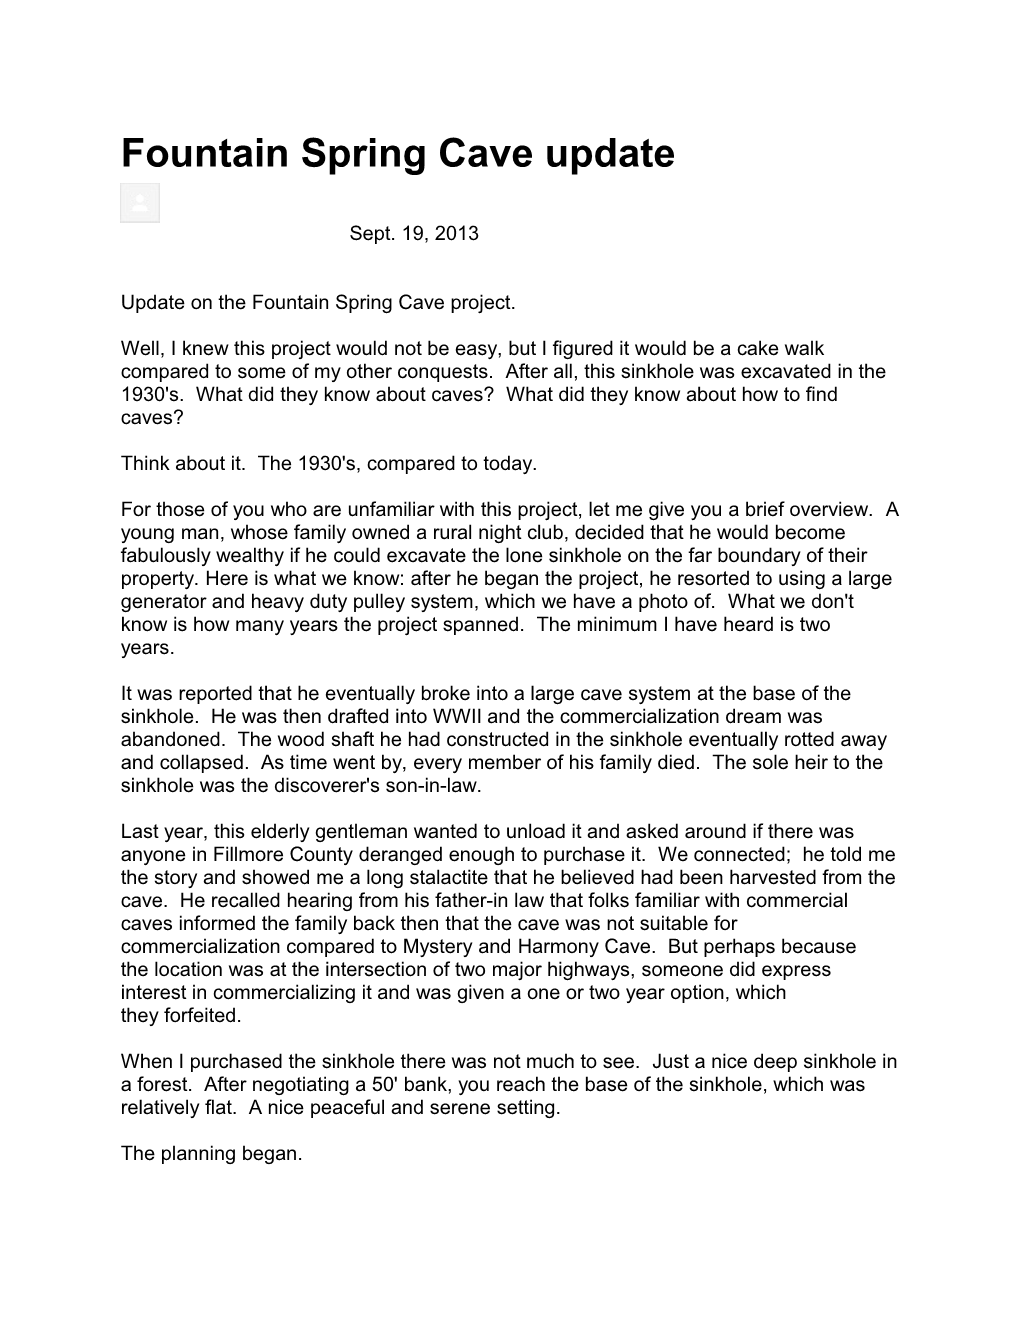 Fountain Spring Cave Update